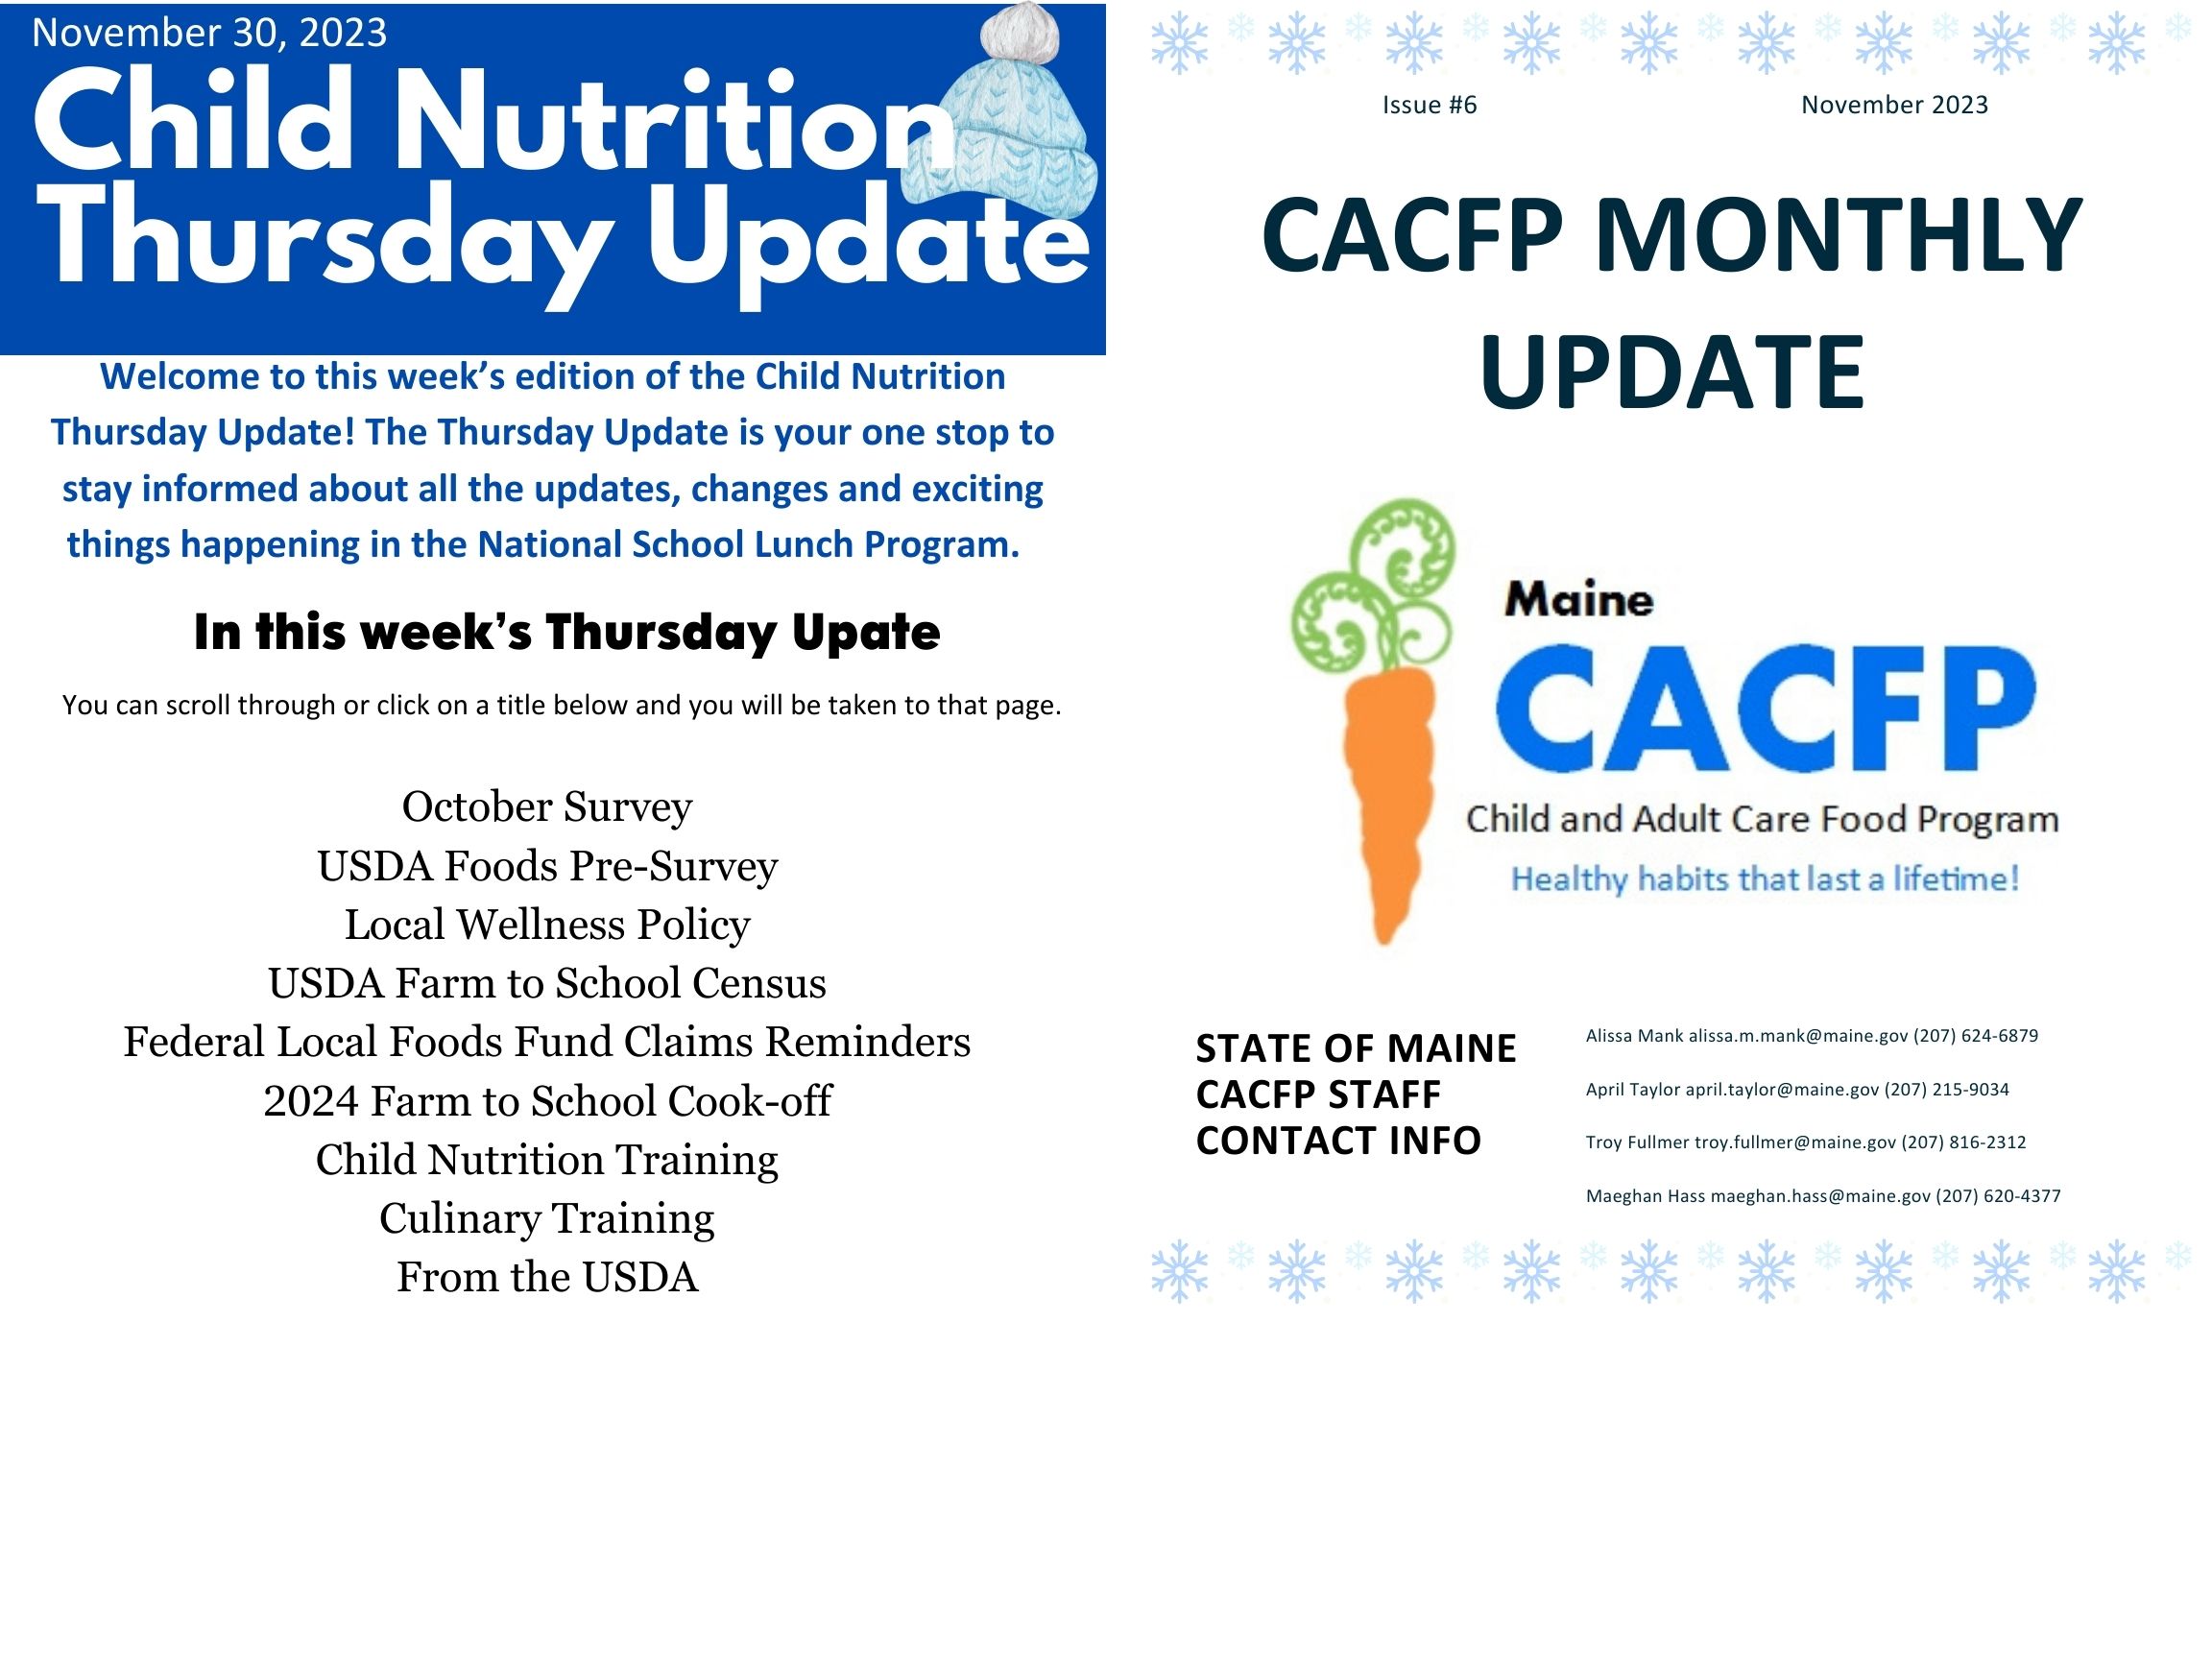 Front page of Thursday Update and CACFP Update